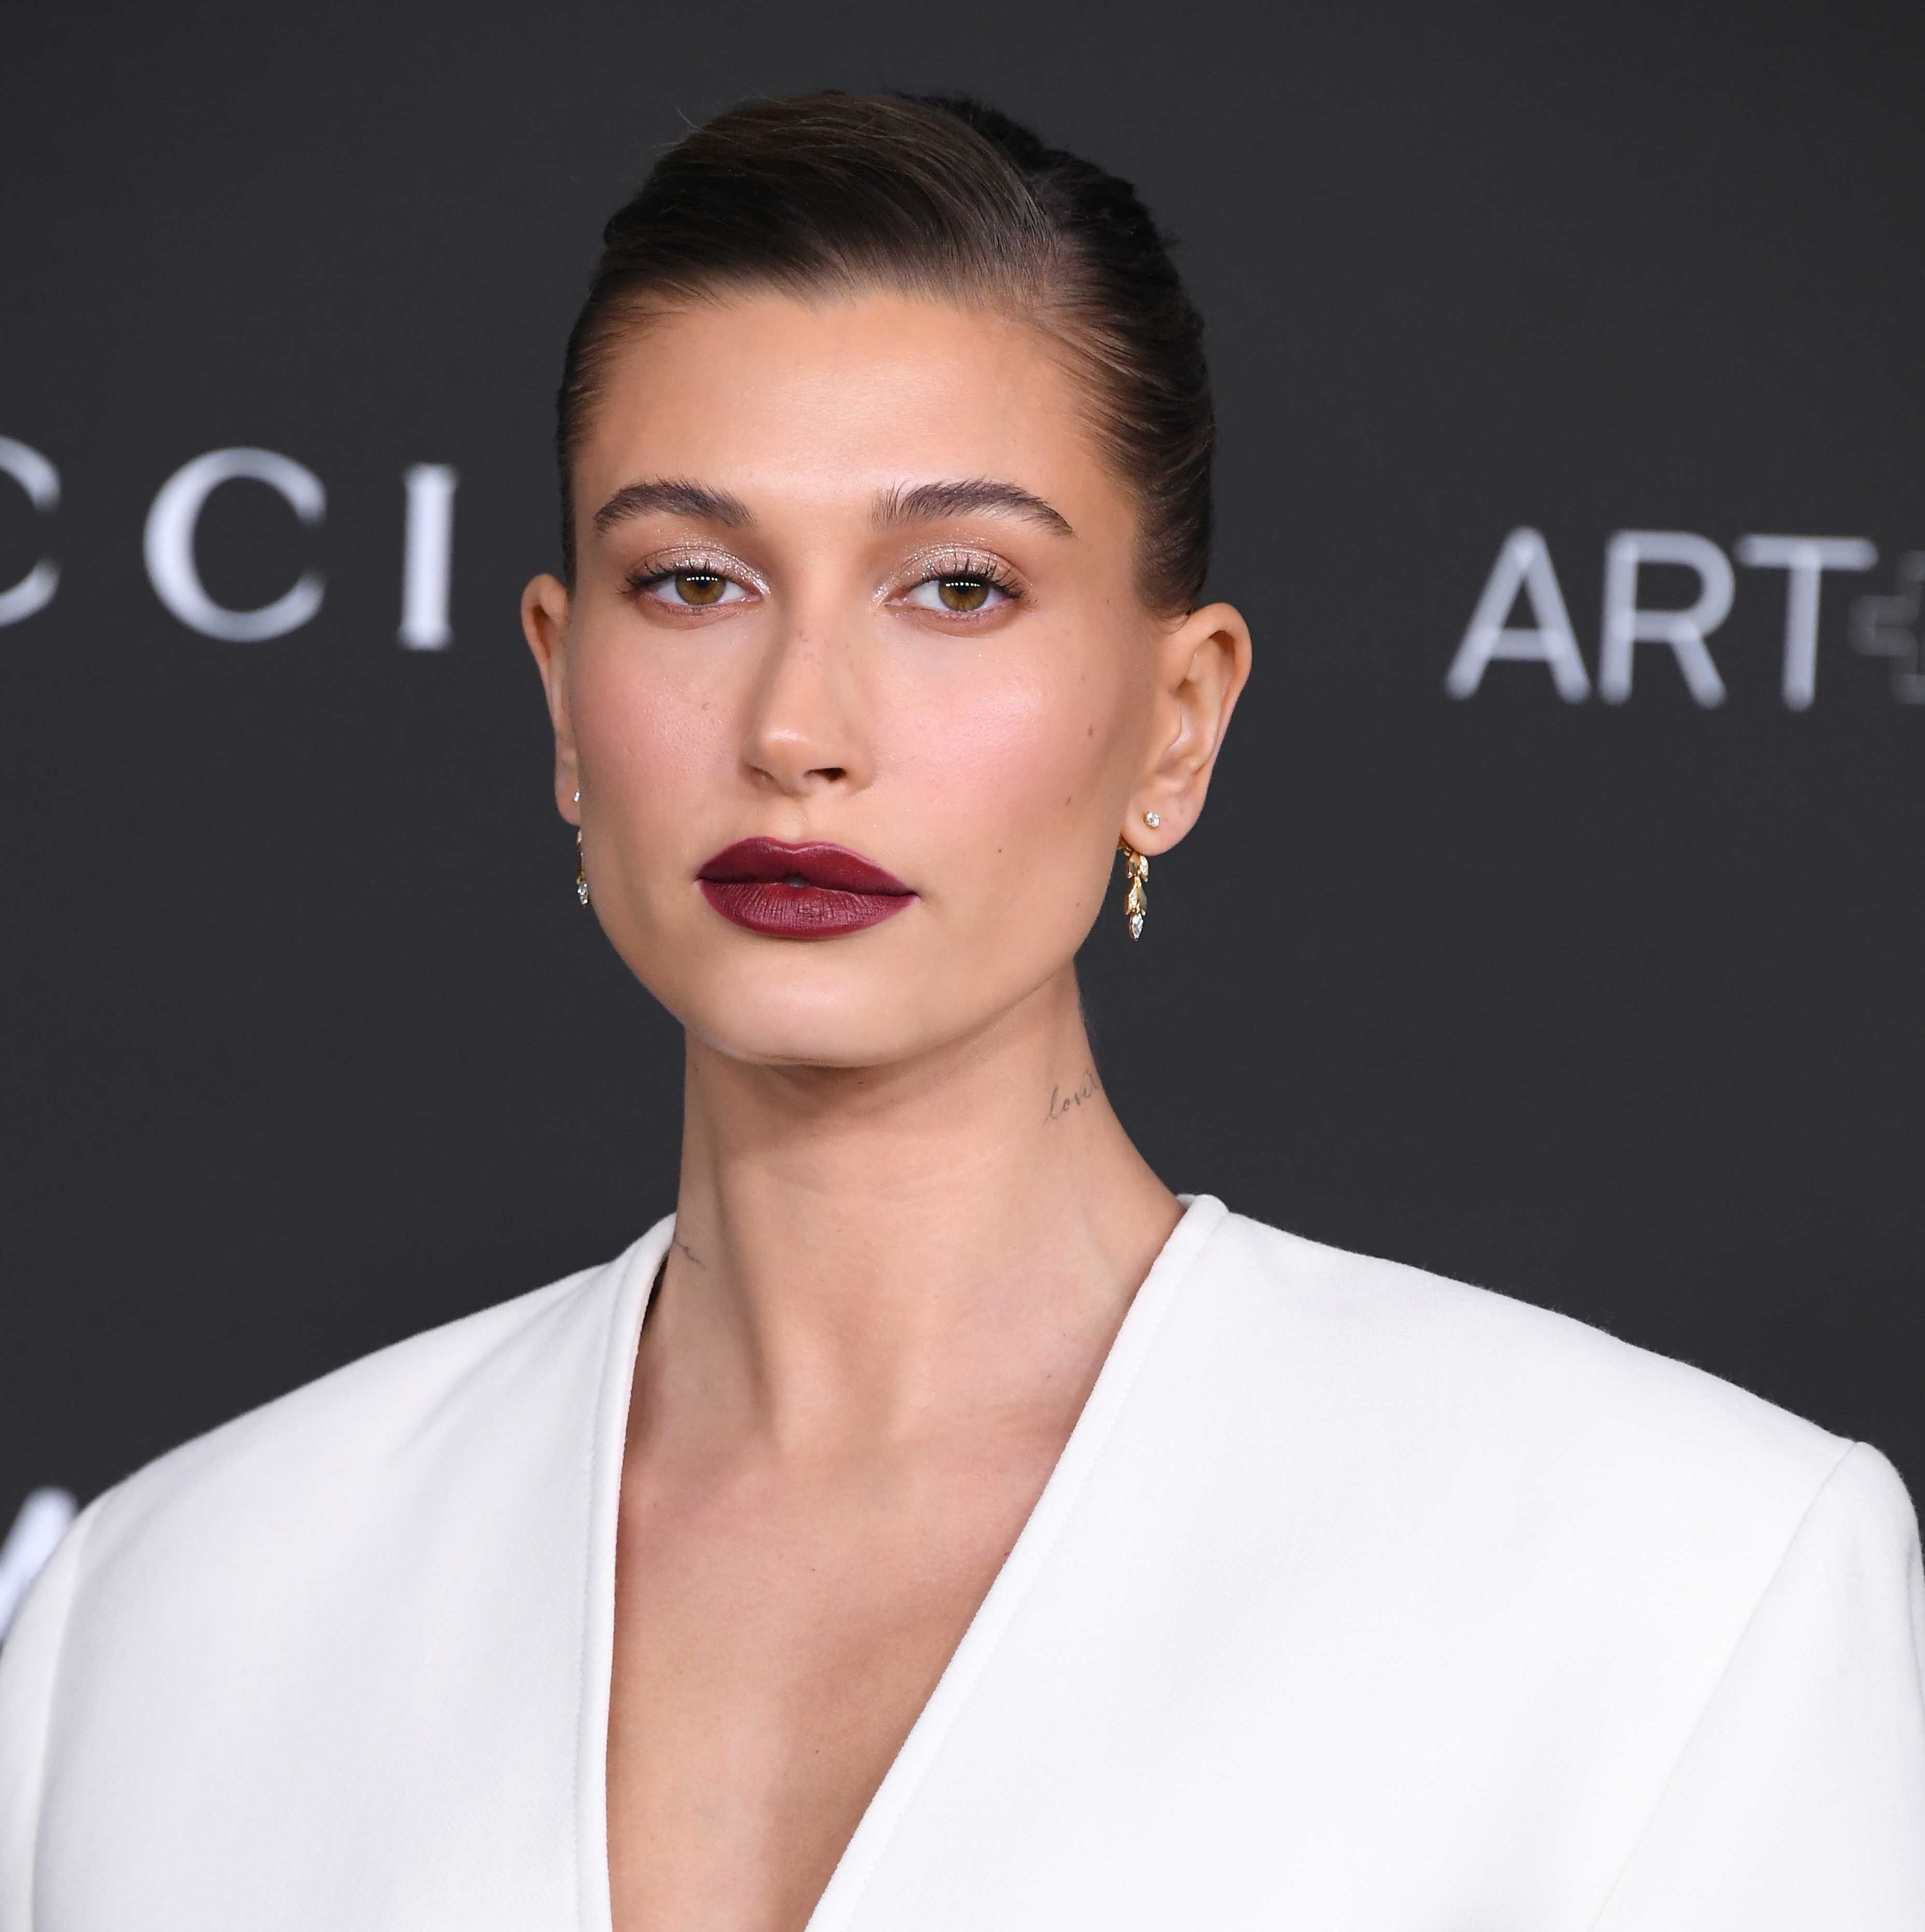 Hailey Bieber Just Posted a No Makeup Selfie From Her Hotel Bathtub